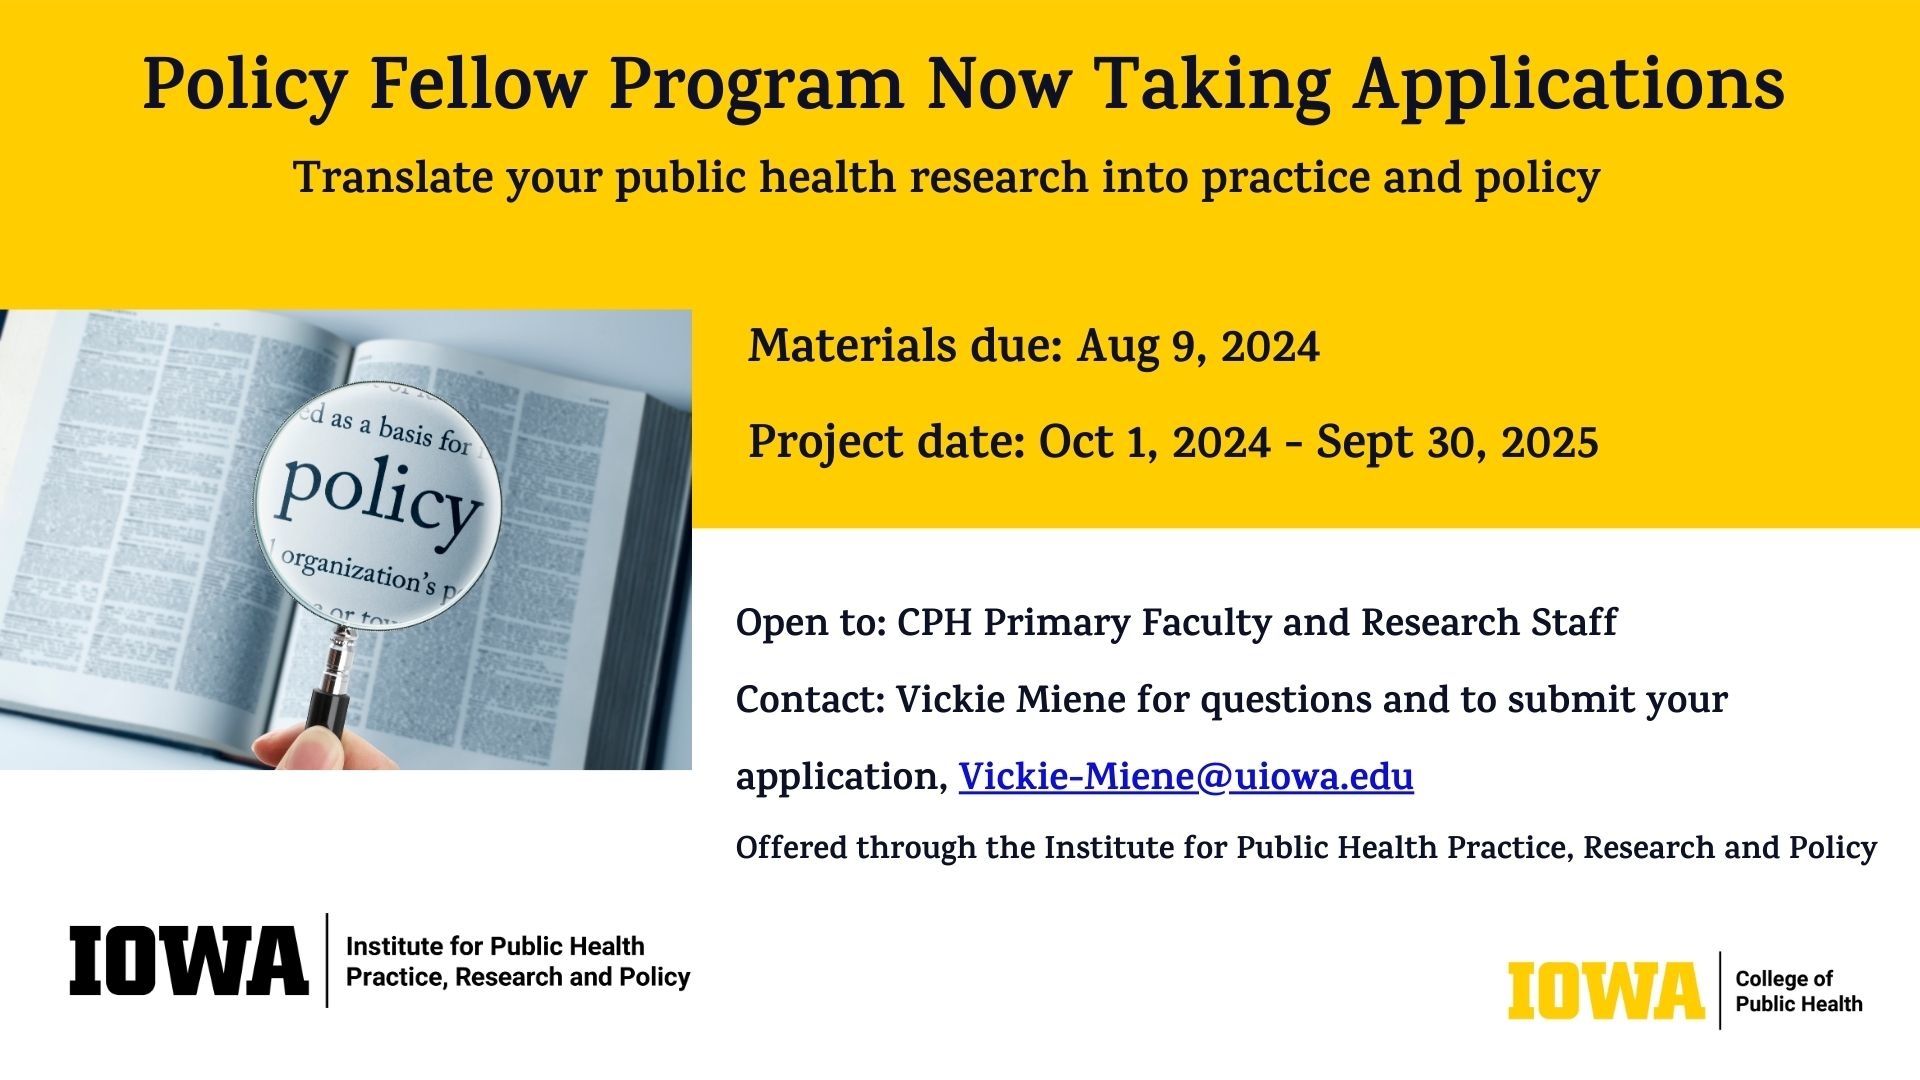 Policy Fellow Program now taking applications. Materials due August 9, 2024. Contact Vickie Miene for details.